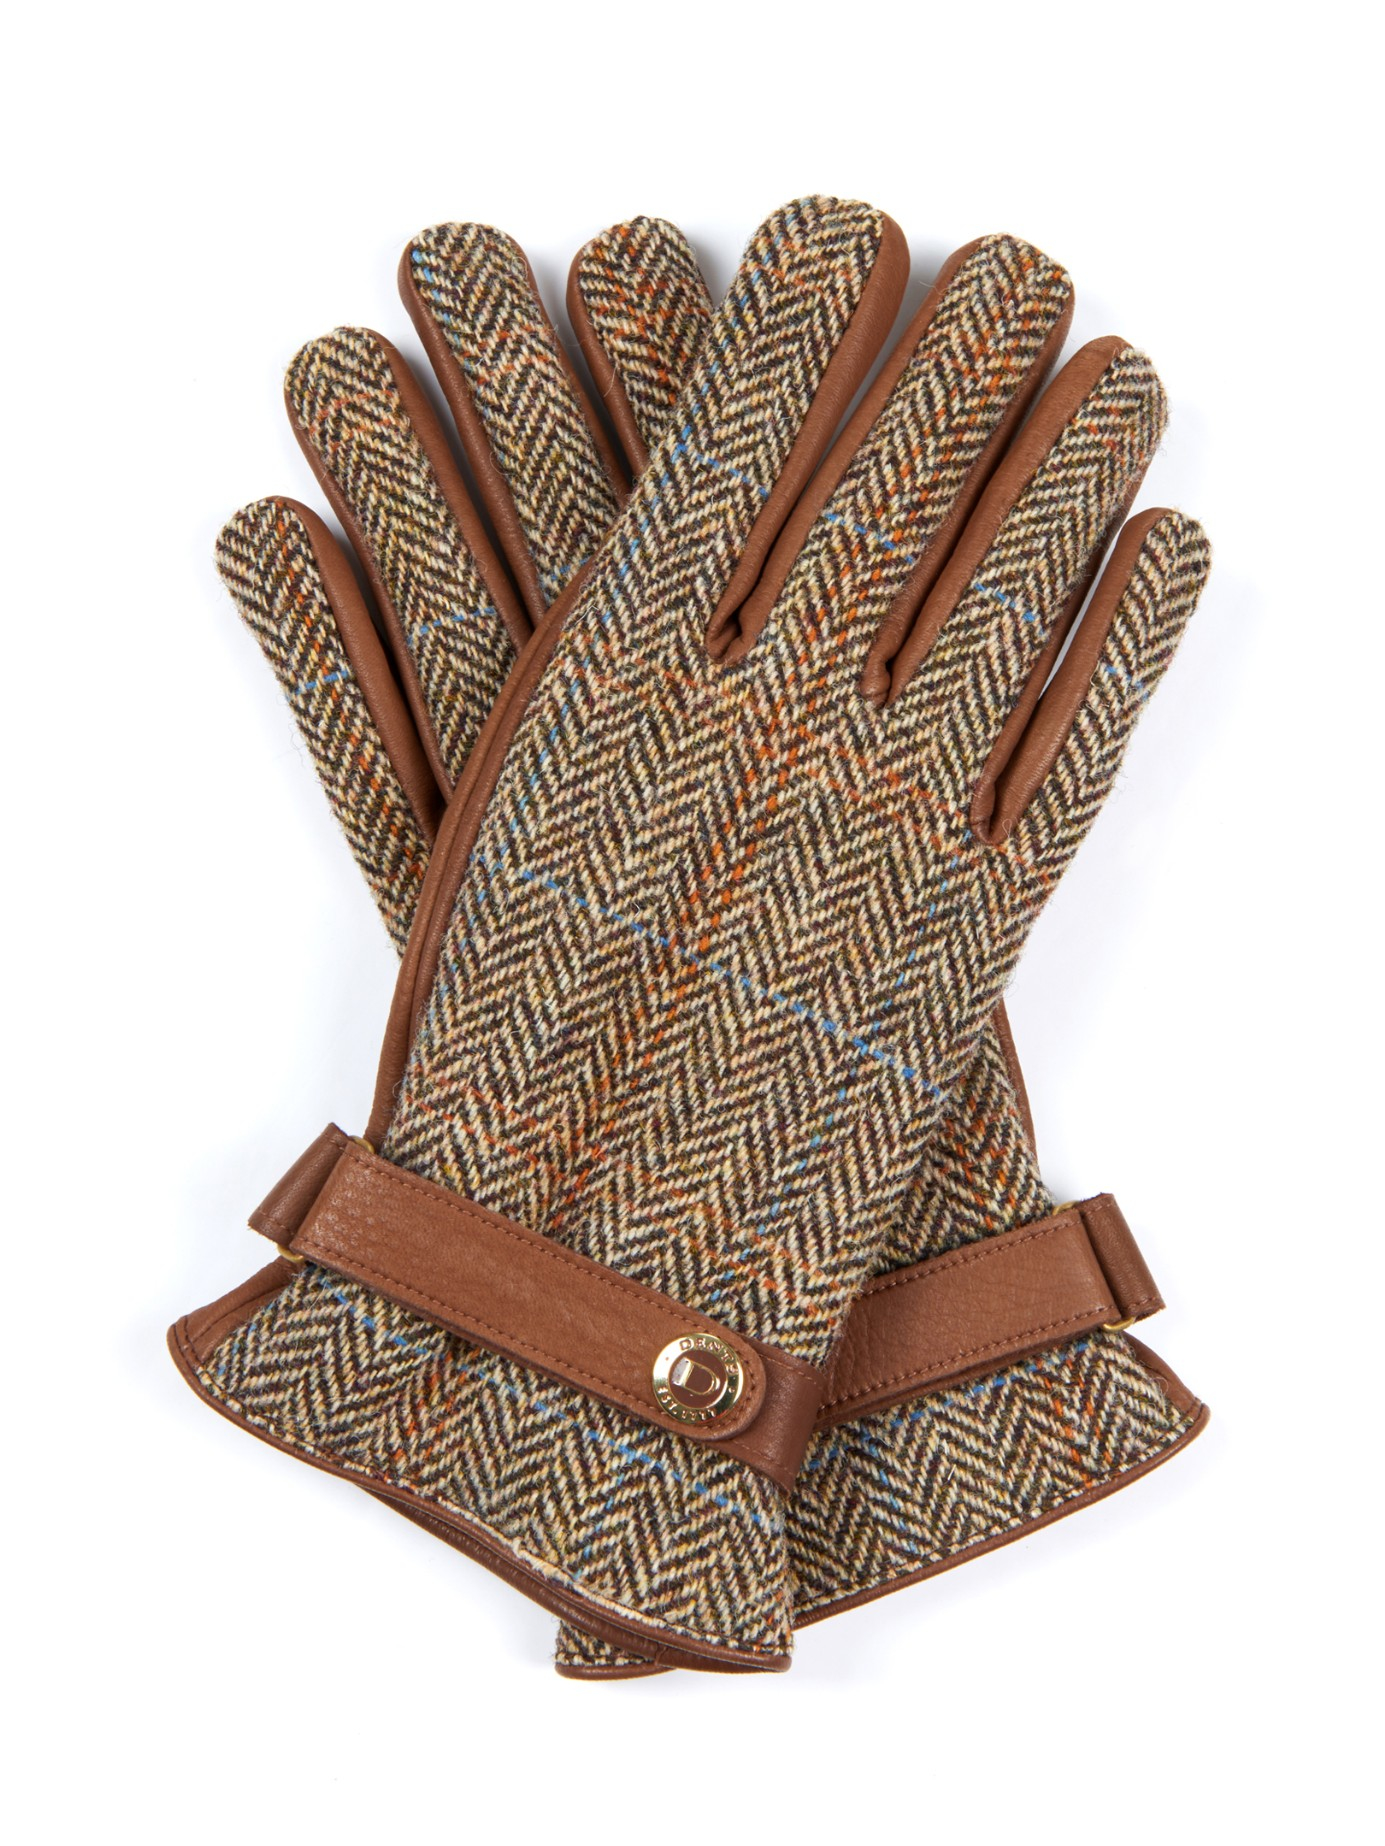 Dents Dunmore Harris-tweed And Leather Gloves in Brown for Men - Lyst